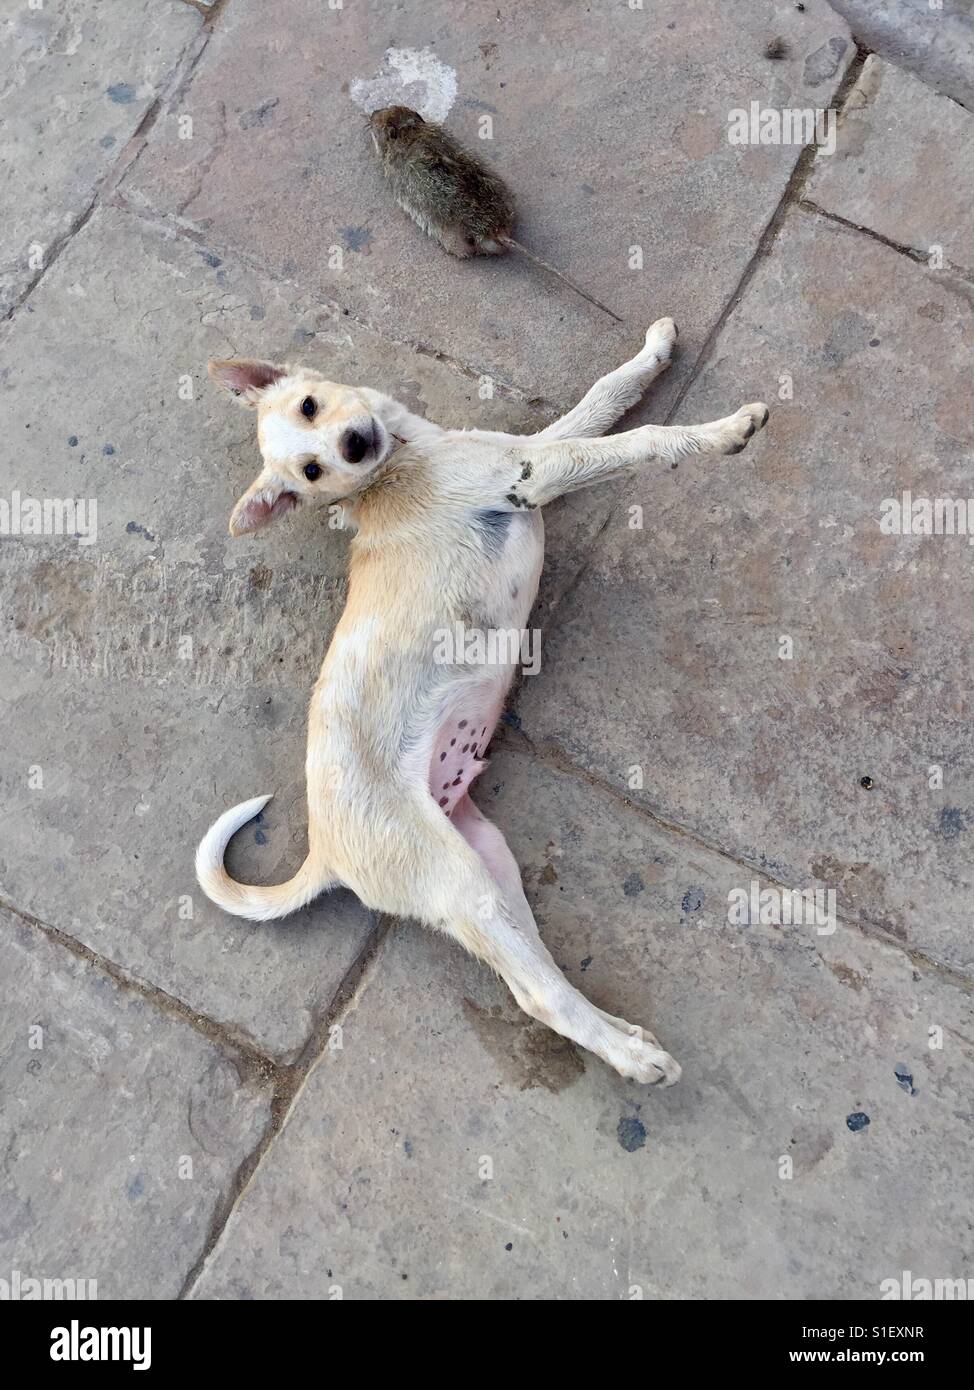 A dog plays with a rat in Varanasi Stock Photo